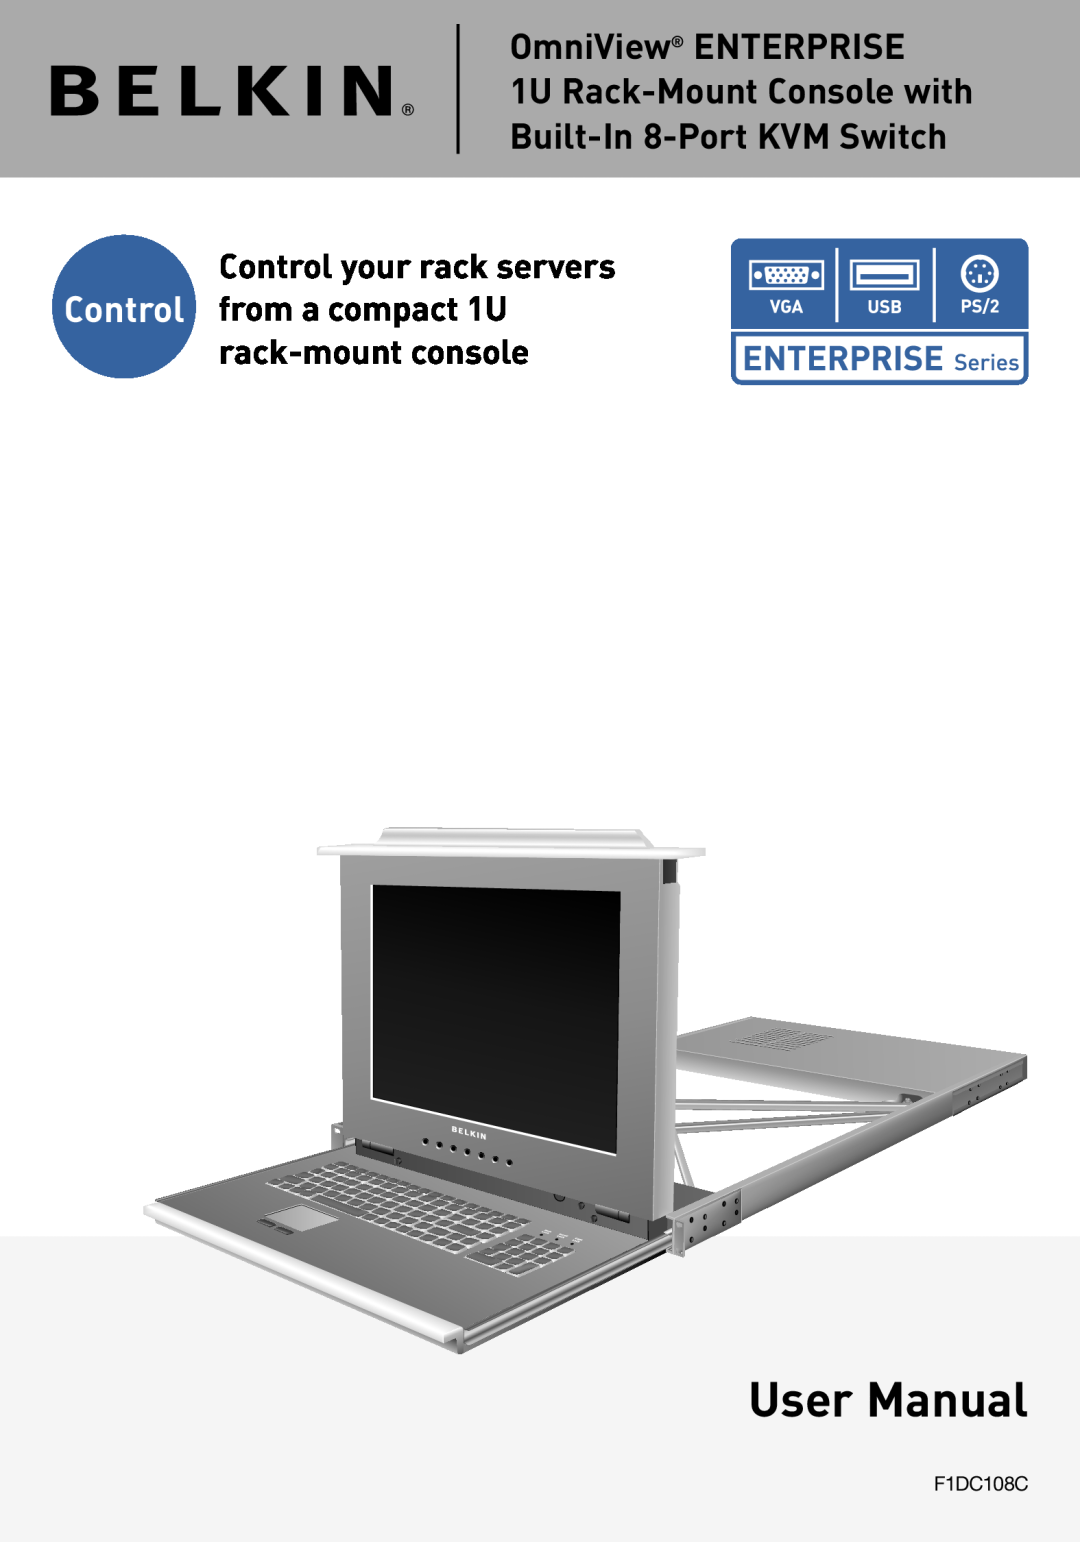 Belkin P74696 rack-mount console, Control your rack servers Control from a compact 1U, User Manual, OmniView ENTERPRISE 